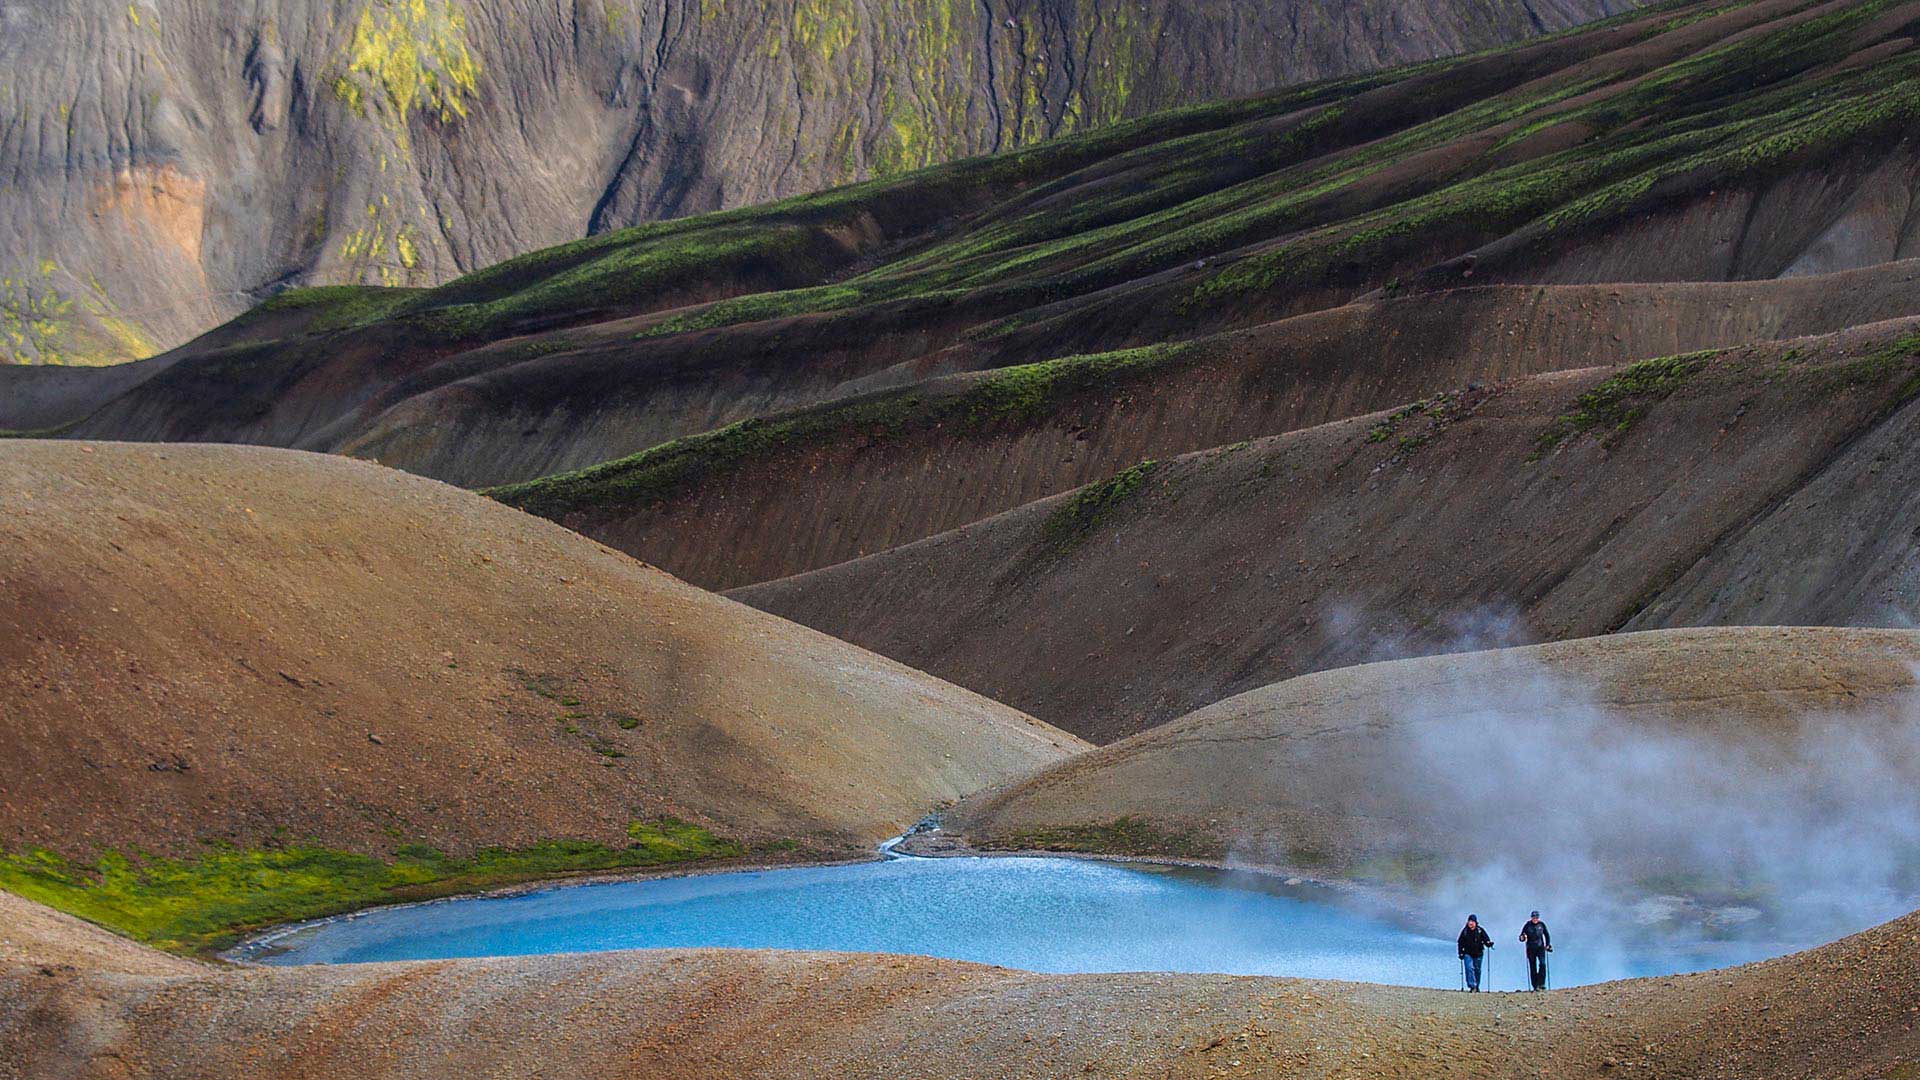 Hikers in the volcanic landscape of Landmannalaugar, Iceland